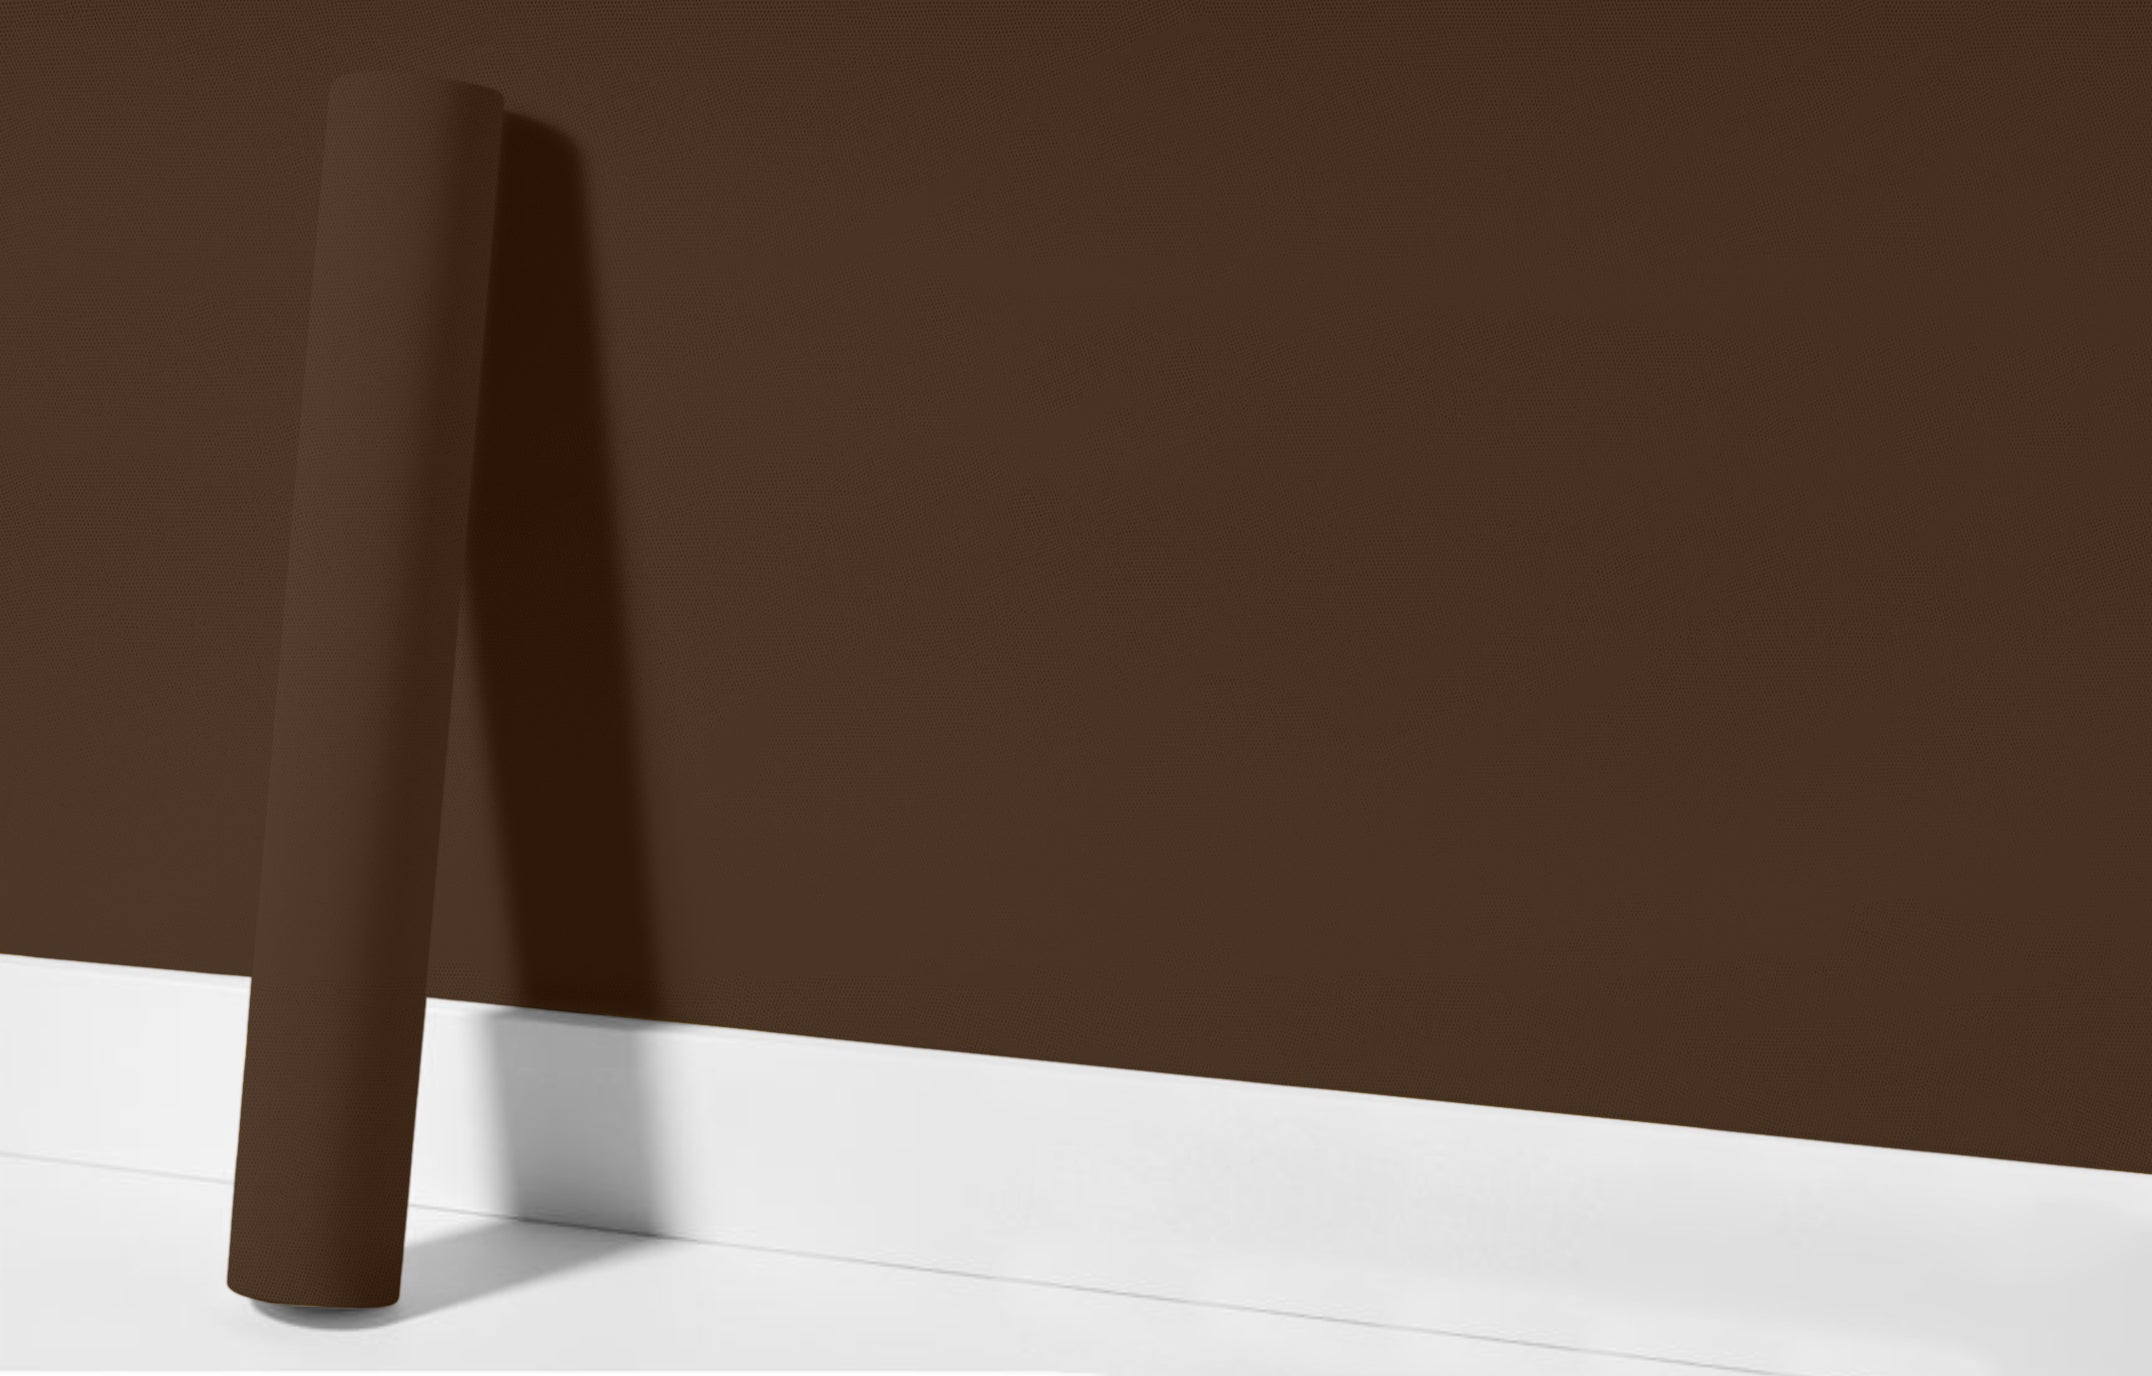 Peel & Stick Removable Re-usable Paint - Color RAL 8014 Sepia Brown - offRAL™ - RALRAW LLC, USA